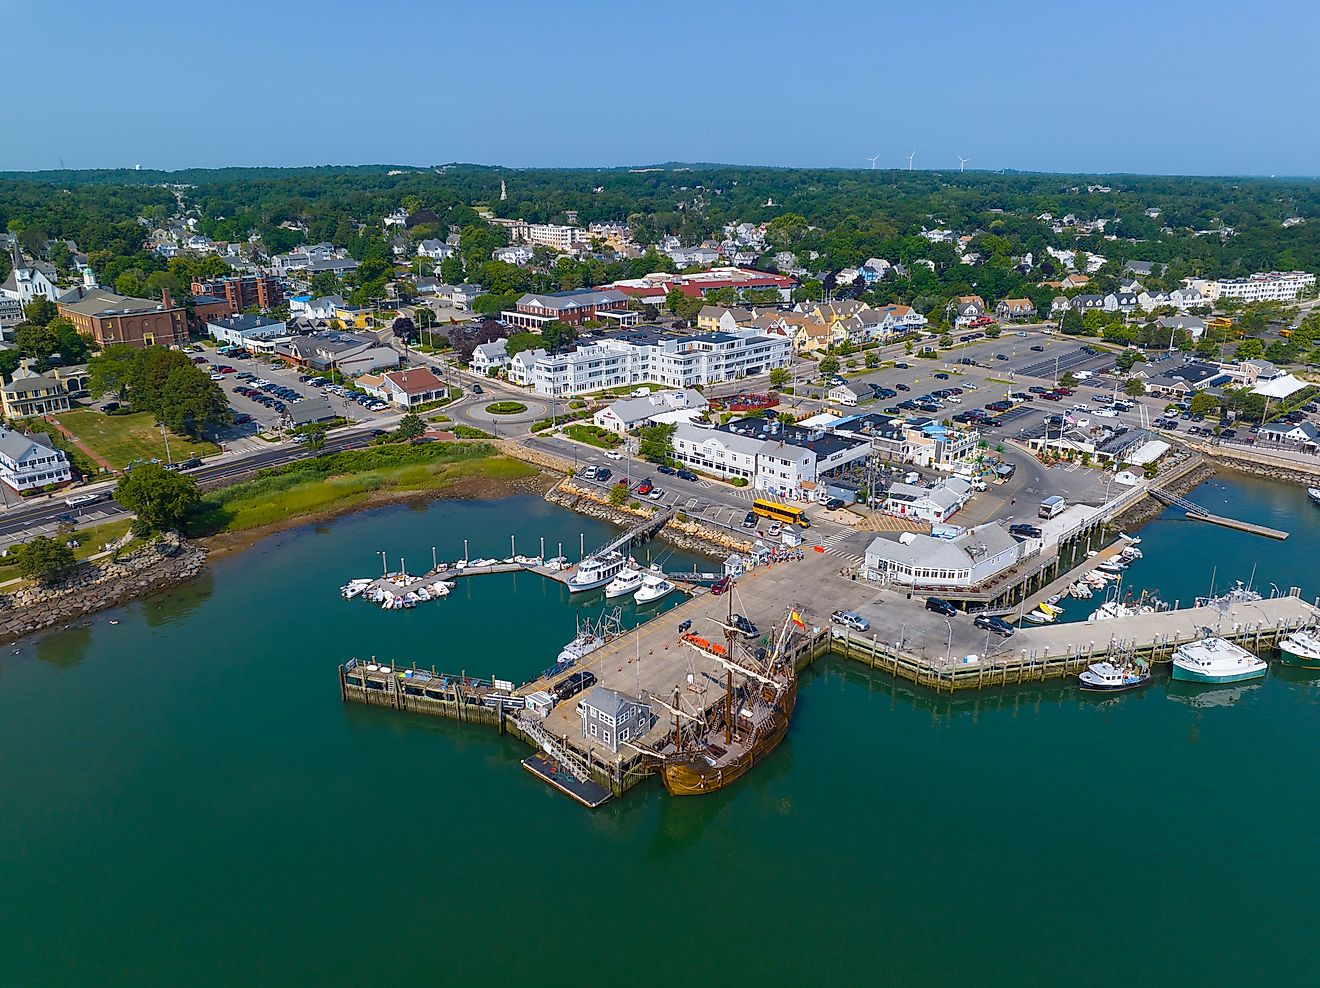 Plymouth town wharf aerial view including historic tall ship Nao Trinidad in historic town center of Plymouth, Massachusetts